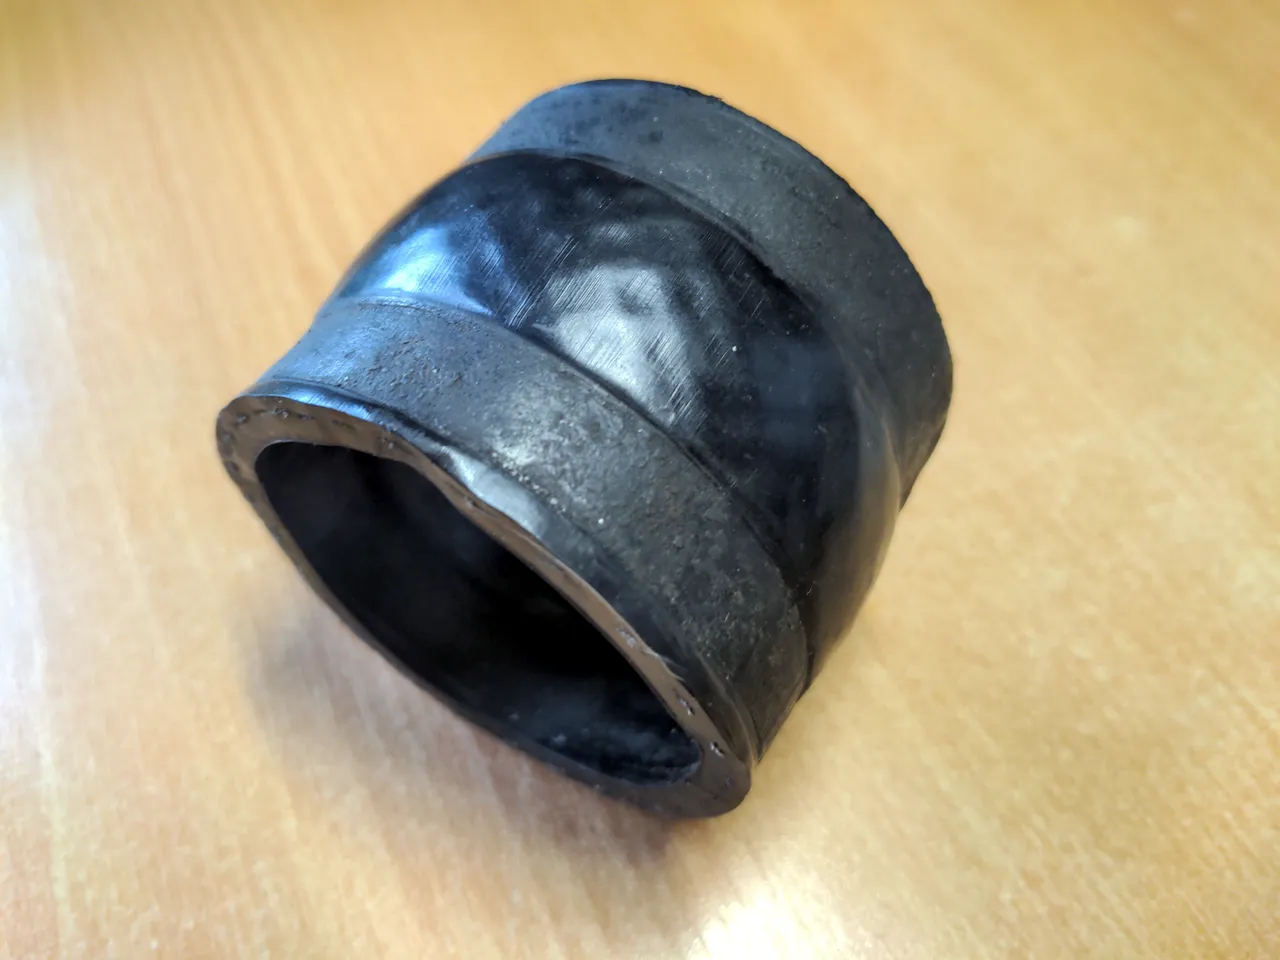 An old, though completely-usable, coupling hose. It is about 60mm in diameter and about as long.